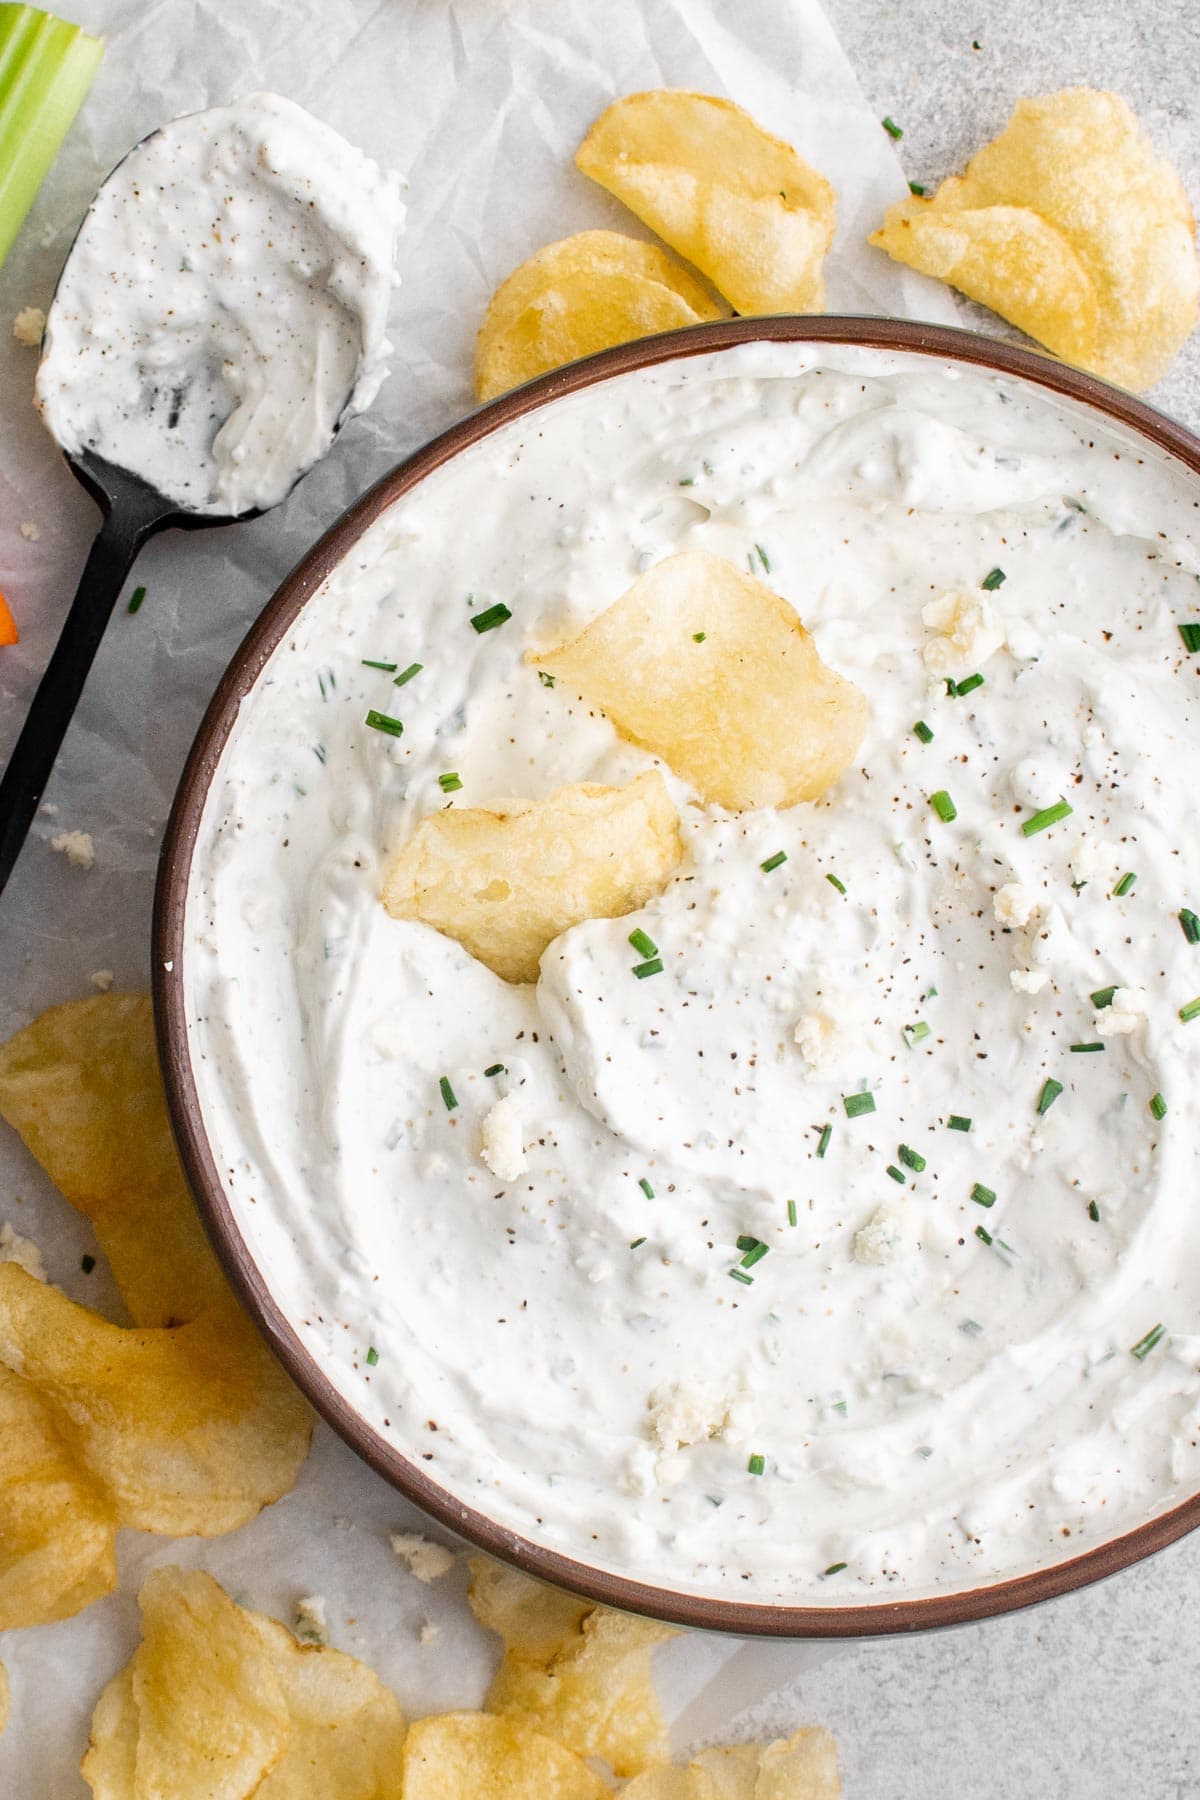 blue cheese dip in a bowl with potato chips